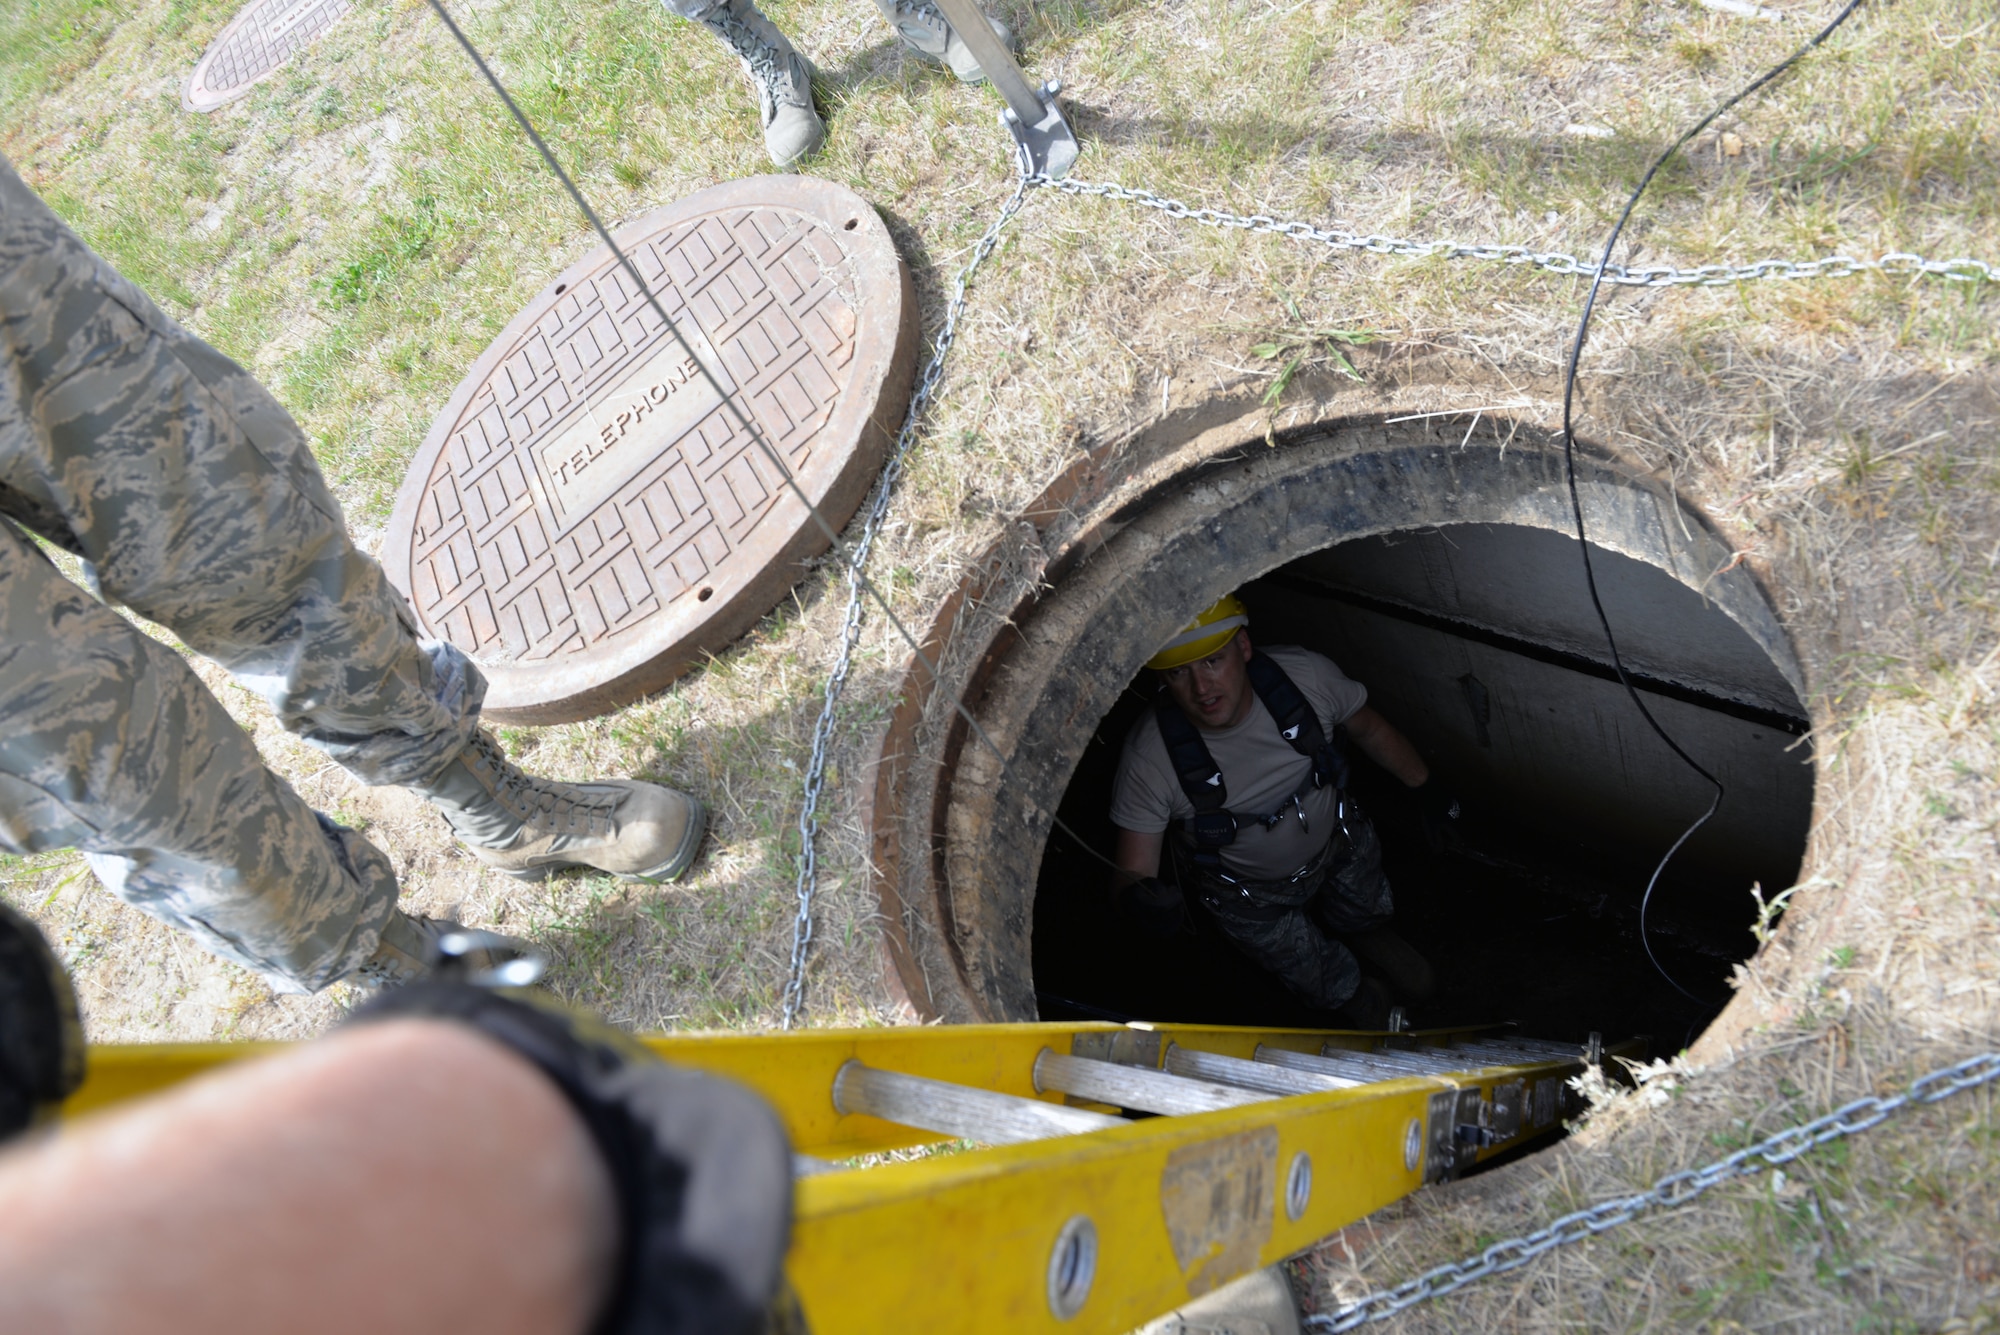 Senior Airmen Mark Chapman, 243rd Engineering Installation Squadron radio frequency transmission technician, speaks to his crew from a manhole at Pease Air National Guard Base, N.H., June 17. The team from Portland, M.E. has assisted the 157th Communications Flight with removing over 20,000 feet of cable from manholes at Pease ANGB. (U.S. Air National Guard photo by Tech. Sgt. Erica Rowe)